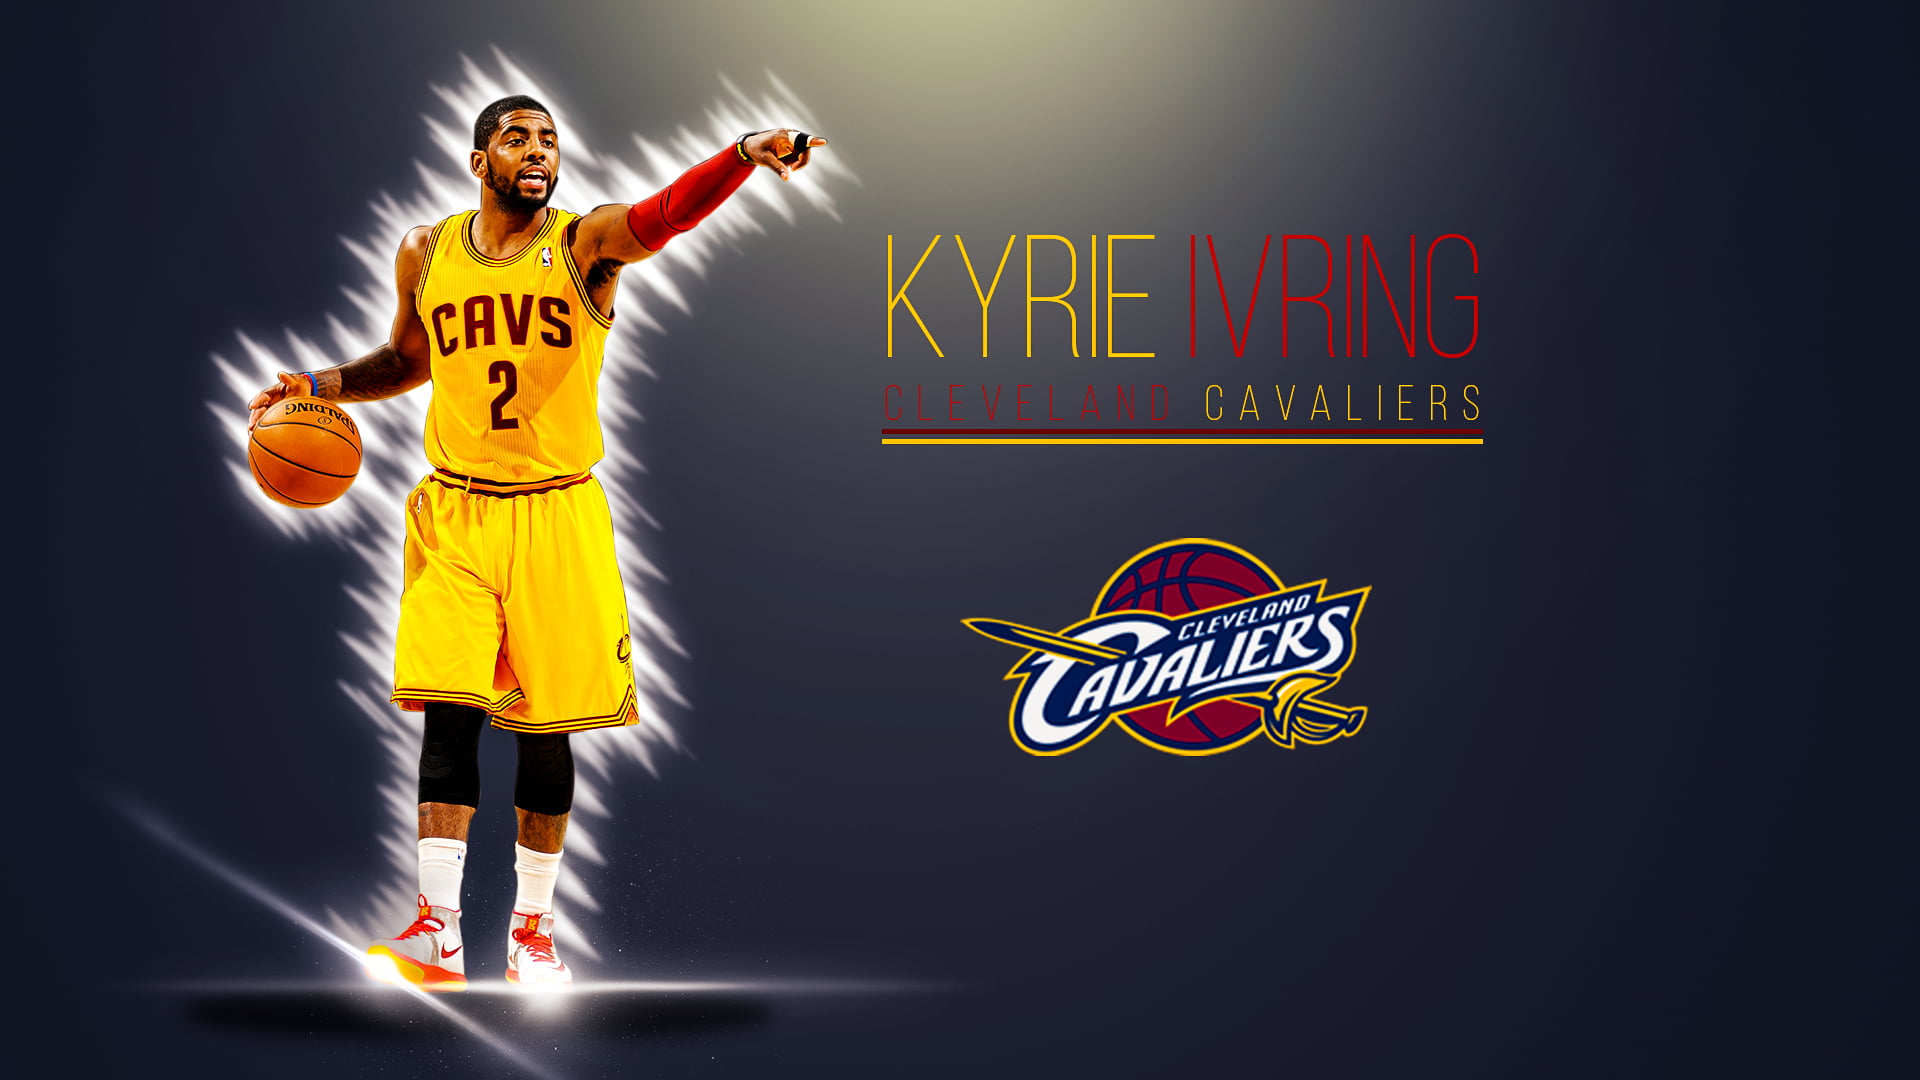 Kyrie Irving With Text Overlay Nba Cleveland Cavaliers Images, Photos, Reviews